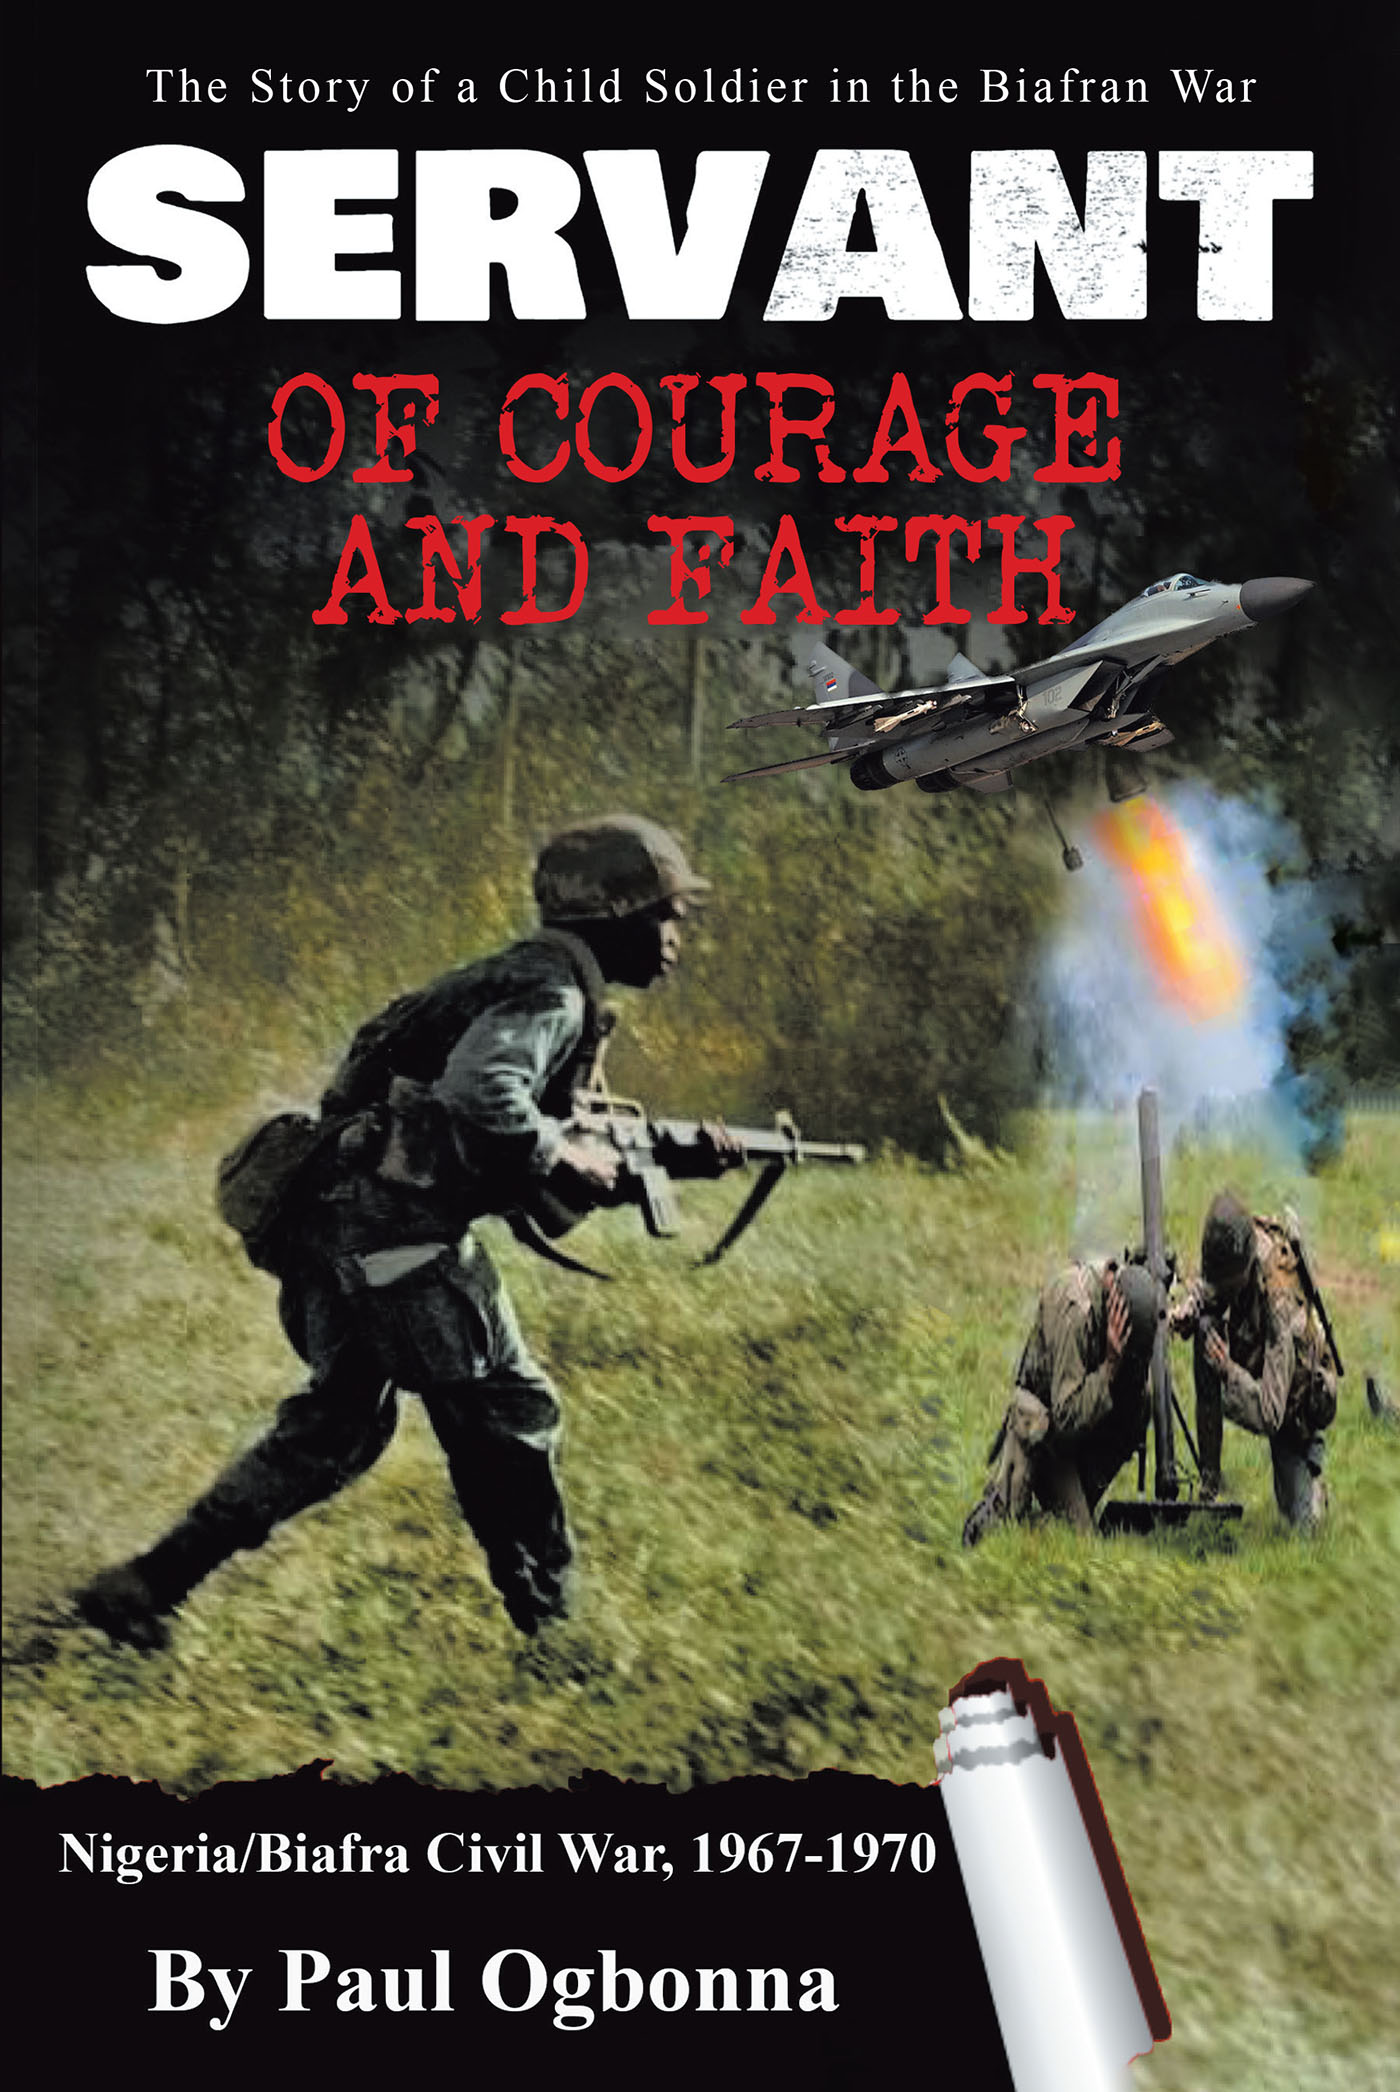 Author Paul Ogbonna’s New Book, "Servant of Courage and Faith: The Story of a Child Soldier in the Biafran War," Emphasizes the Horrors of War